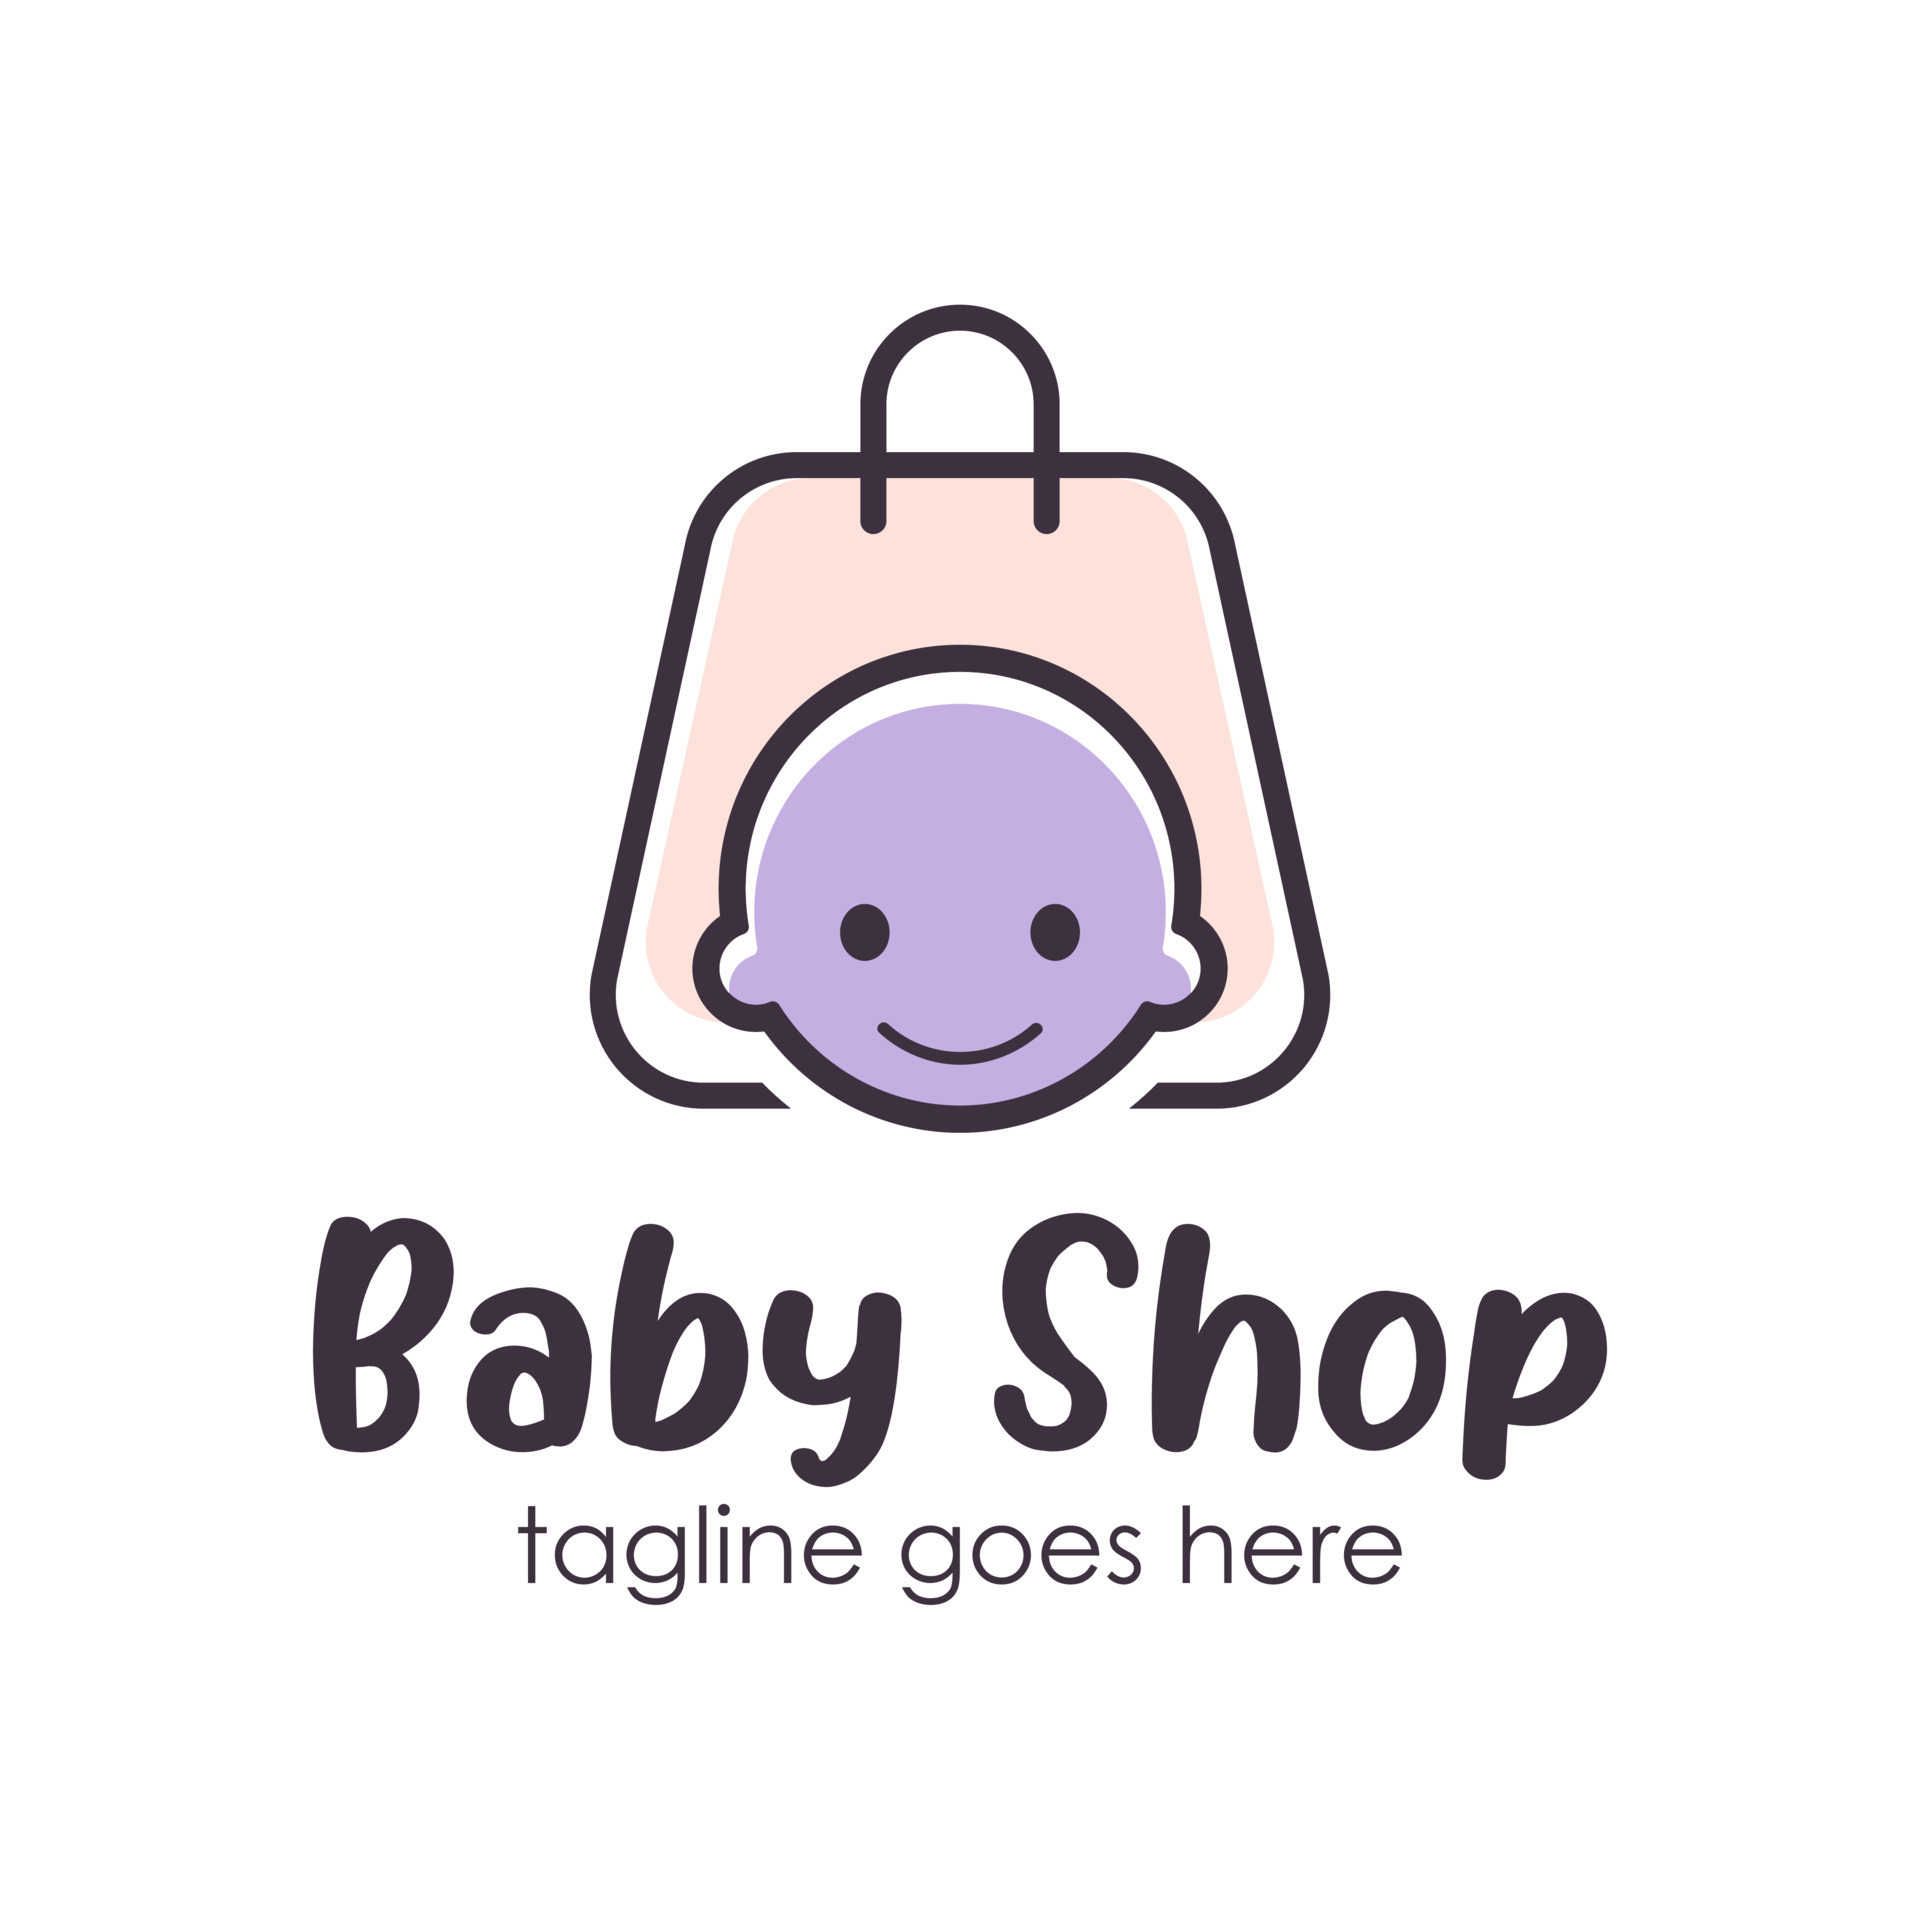 Kids Shop Logo Vector Art, Icons, and Graphics for Free Download